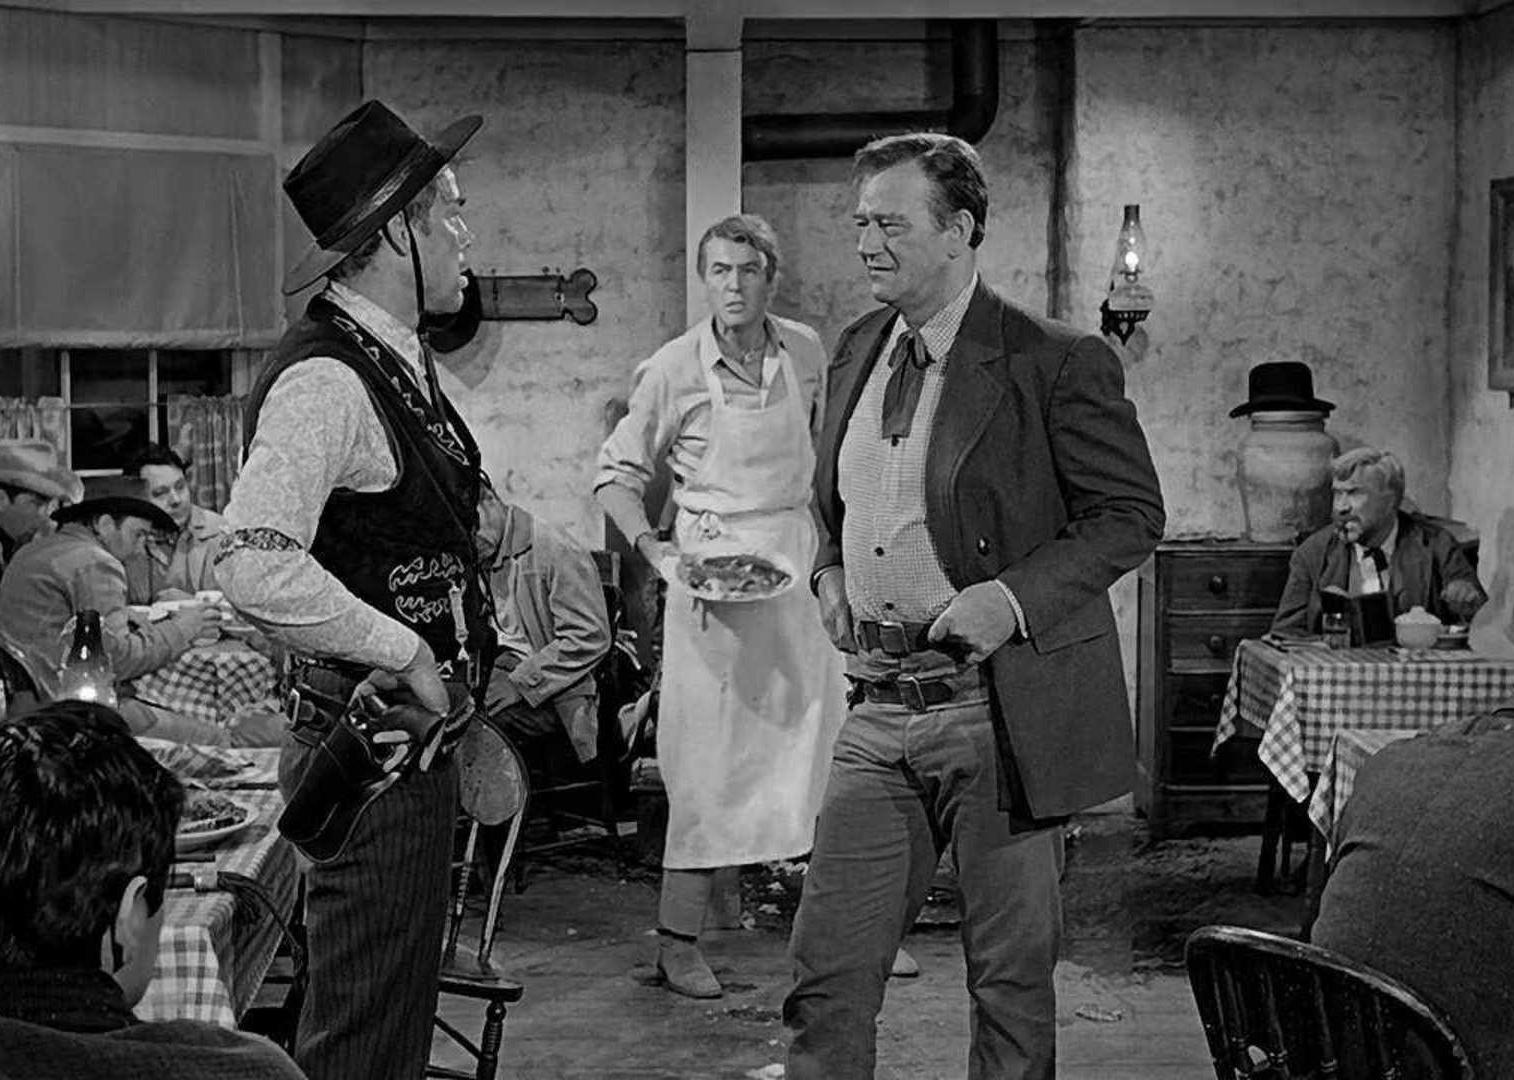 Actors in a scene from The Man Who Shot Liberty Valance.